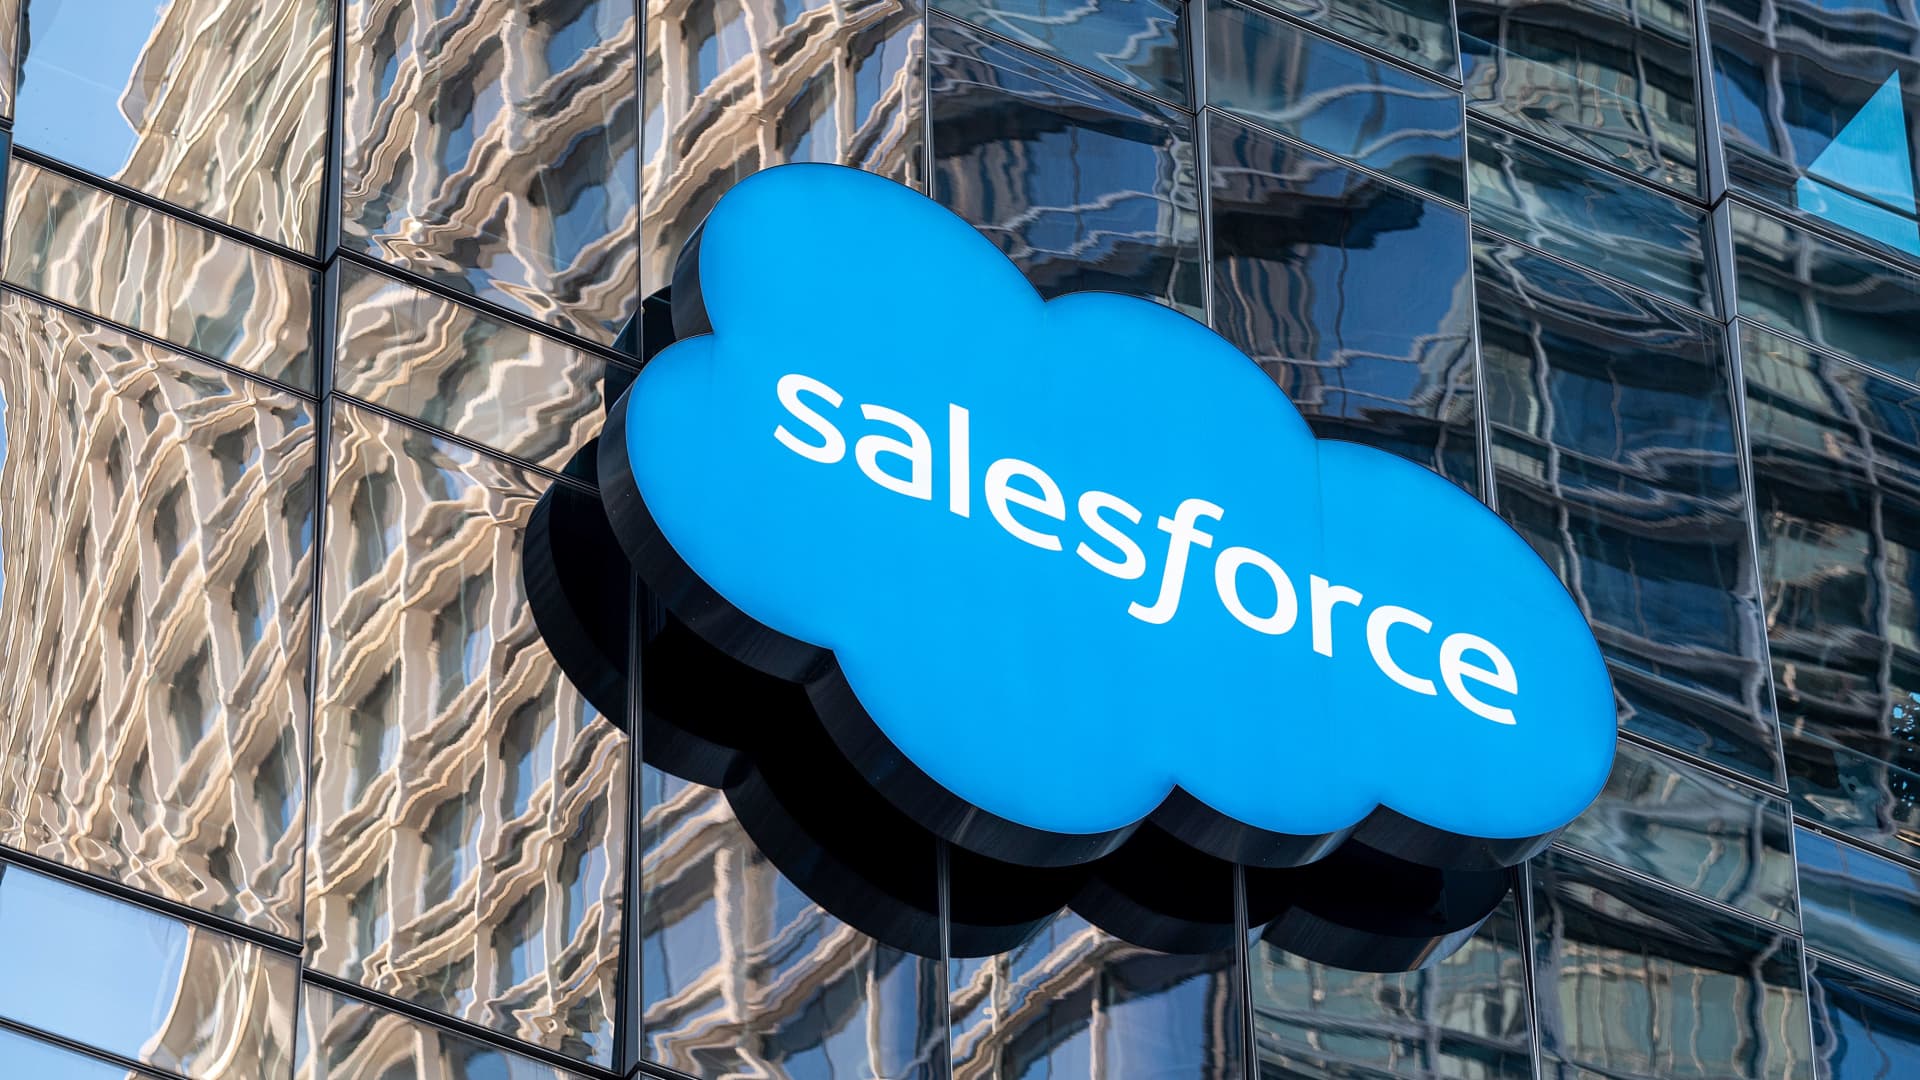 Salesforce is cutting 10% of its personnel, more than 7,000 employees